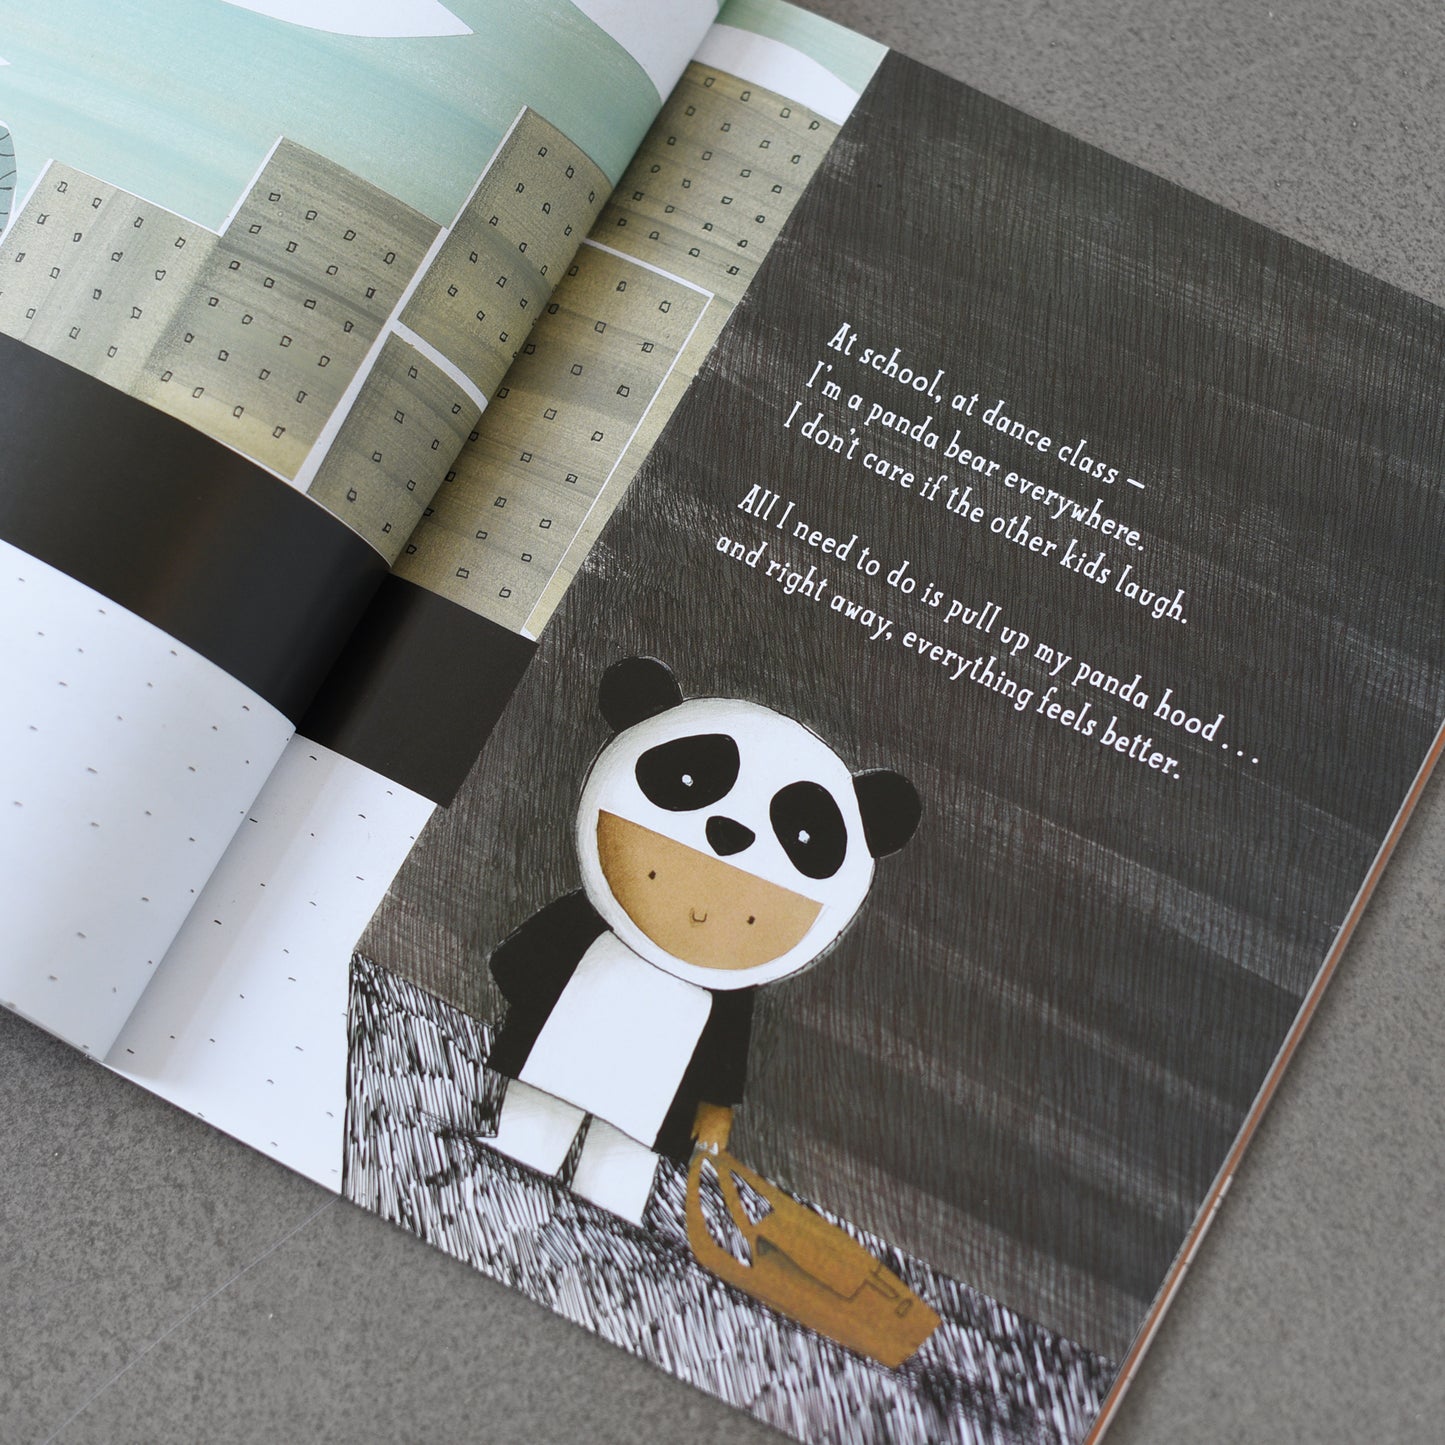 My Panda Sweater - written by Gilles Baum, illustrated by Barroux